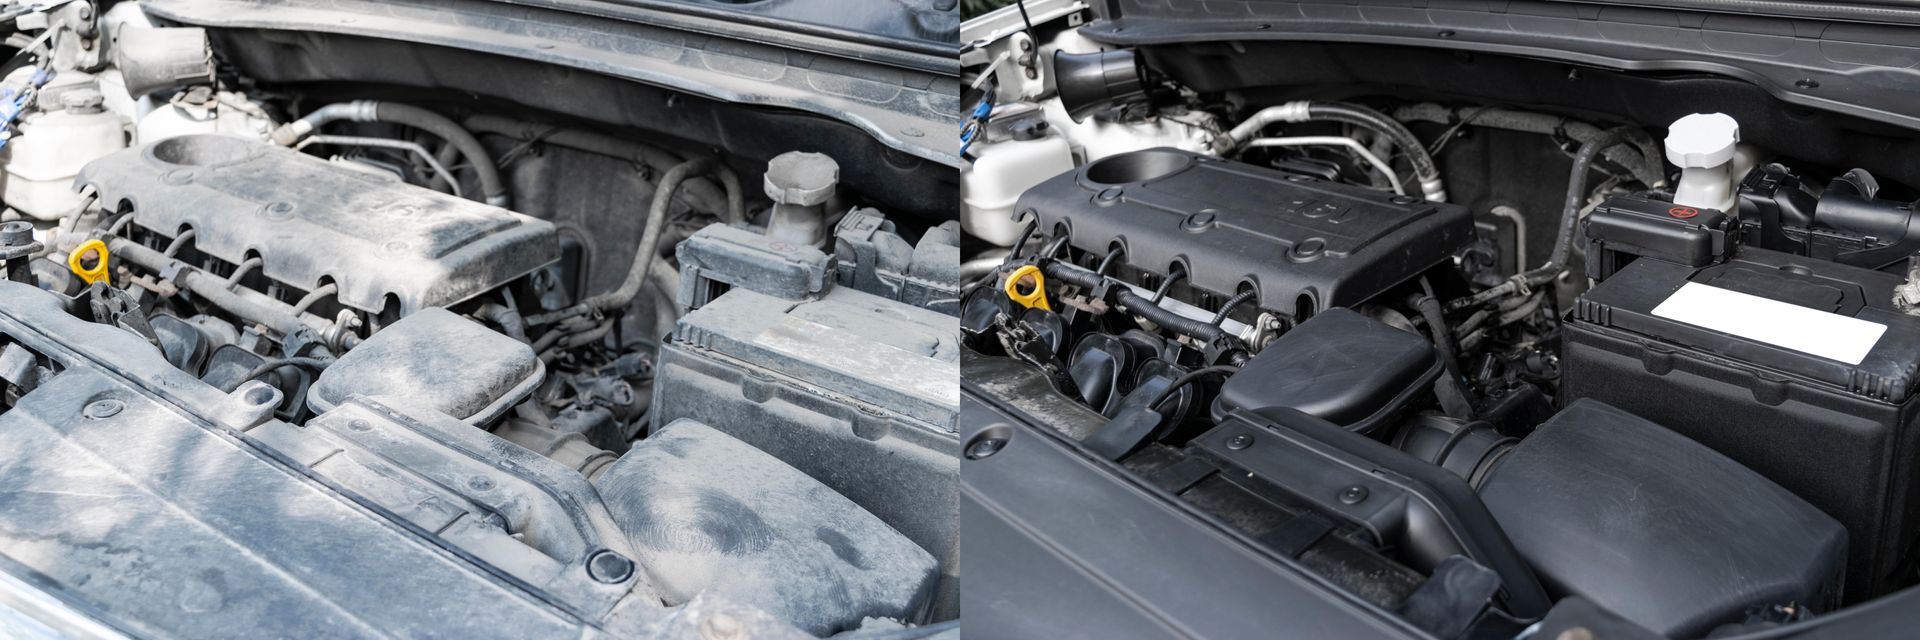 Ocala Car Detailing Before and after picture of engine bay cleaning